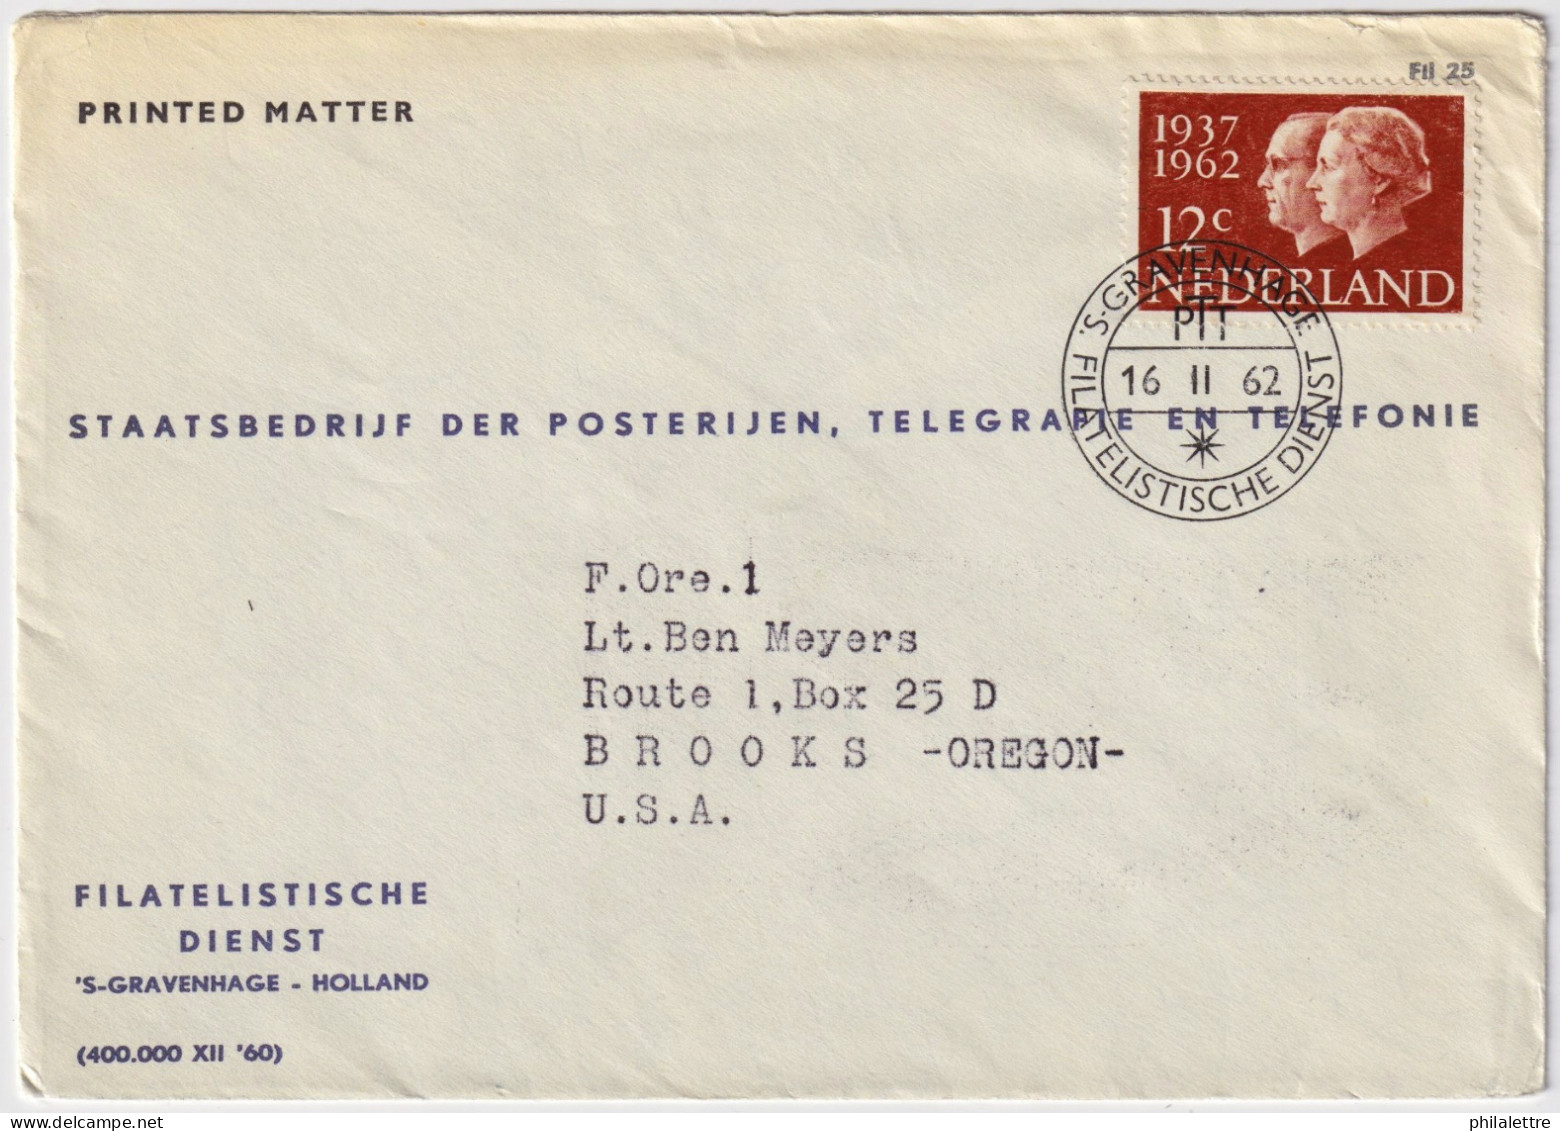 PAYS-BAS / THE NETHERLANDS - 1962 Mi.772 On PTT Cover From 'S-GRAVENHAGE To BROOKS, Oregon, USA - Storia Postale